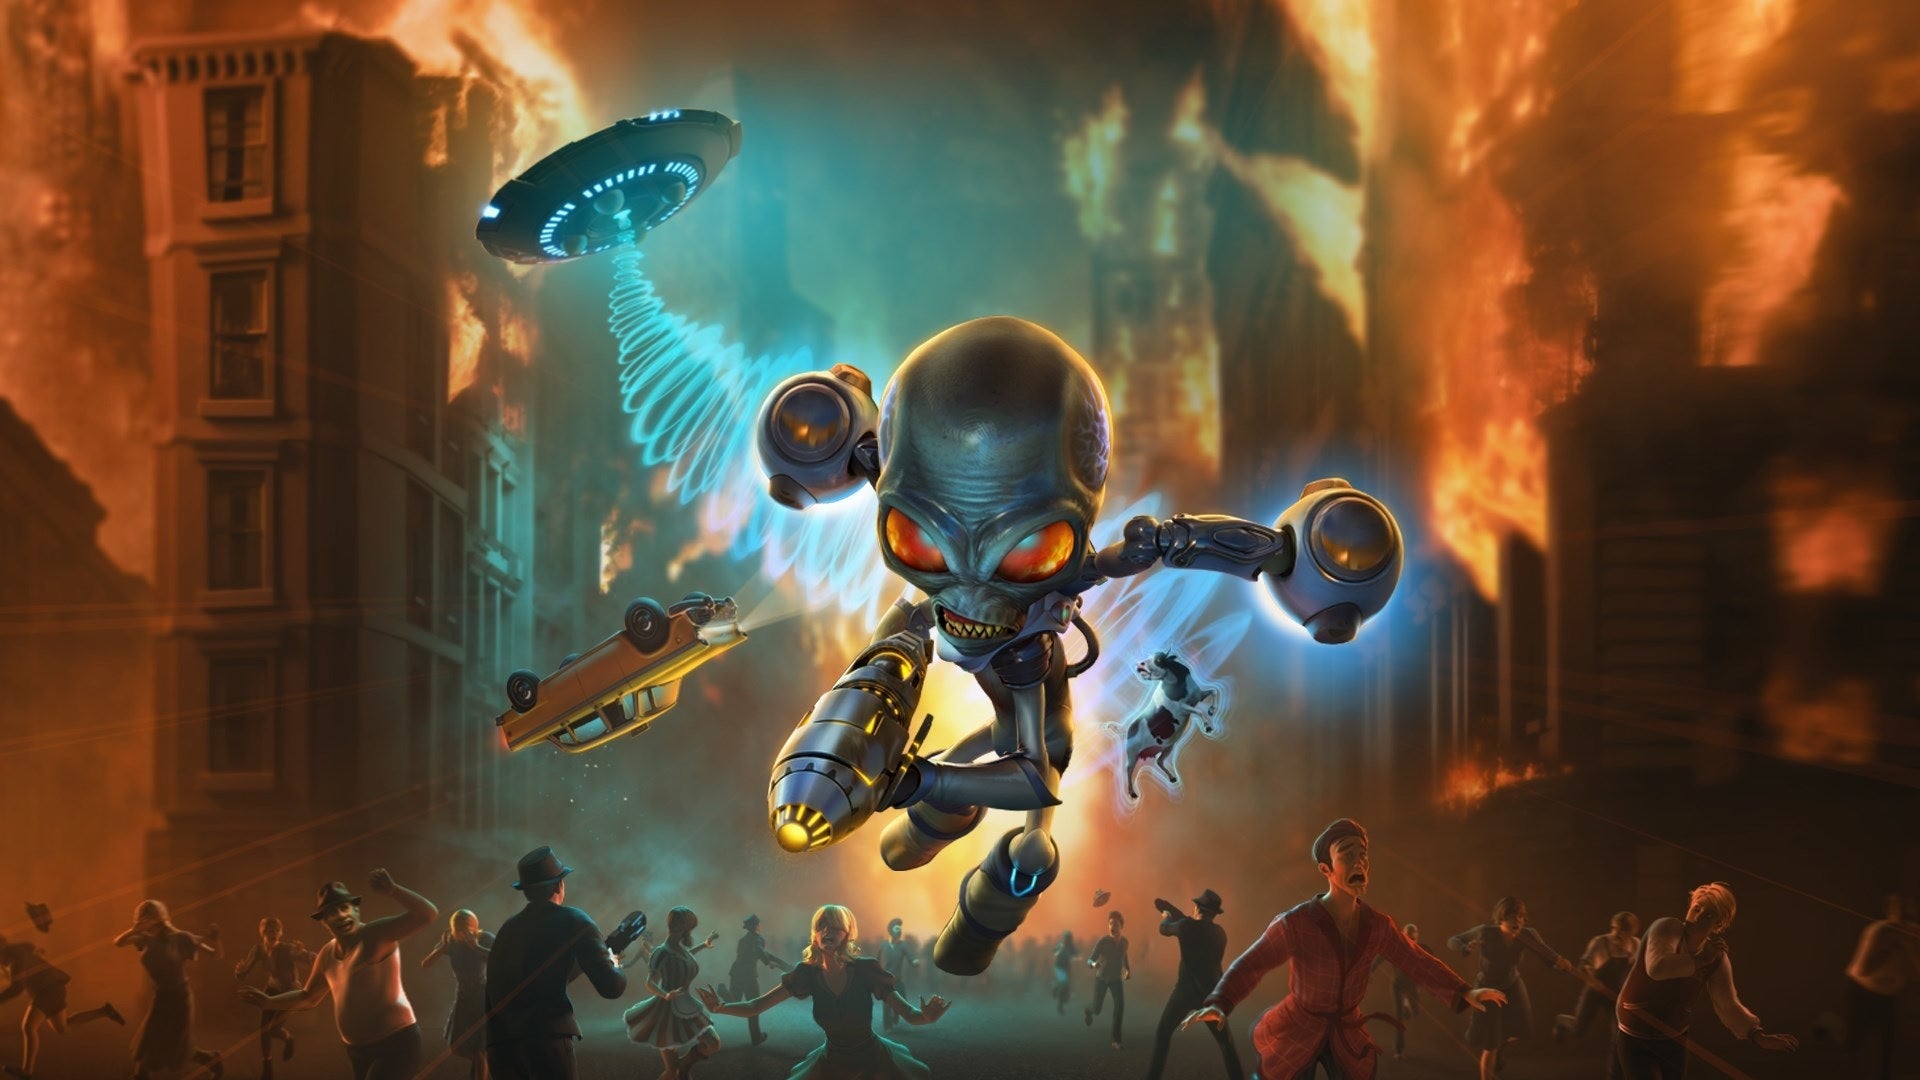 Official art for Destroy all Humans